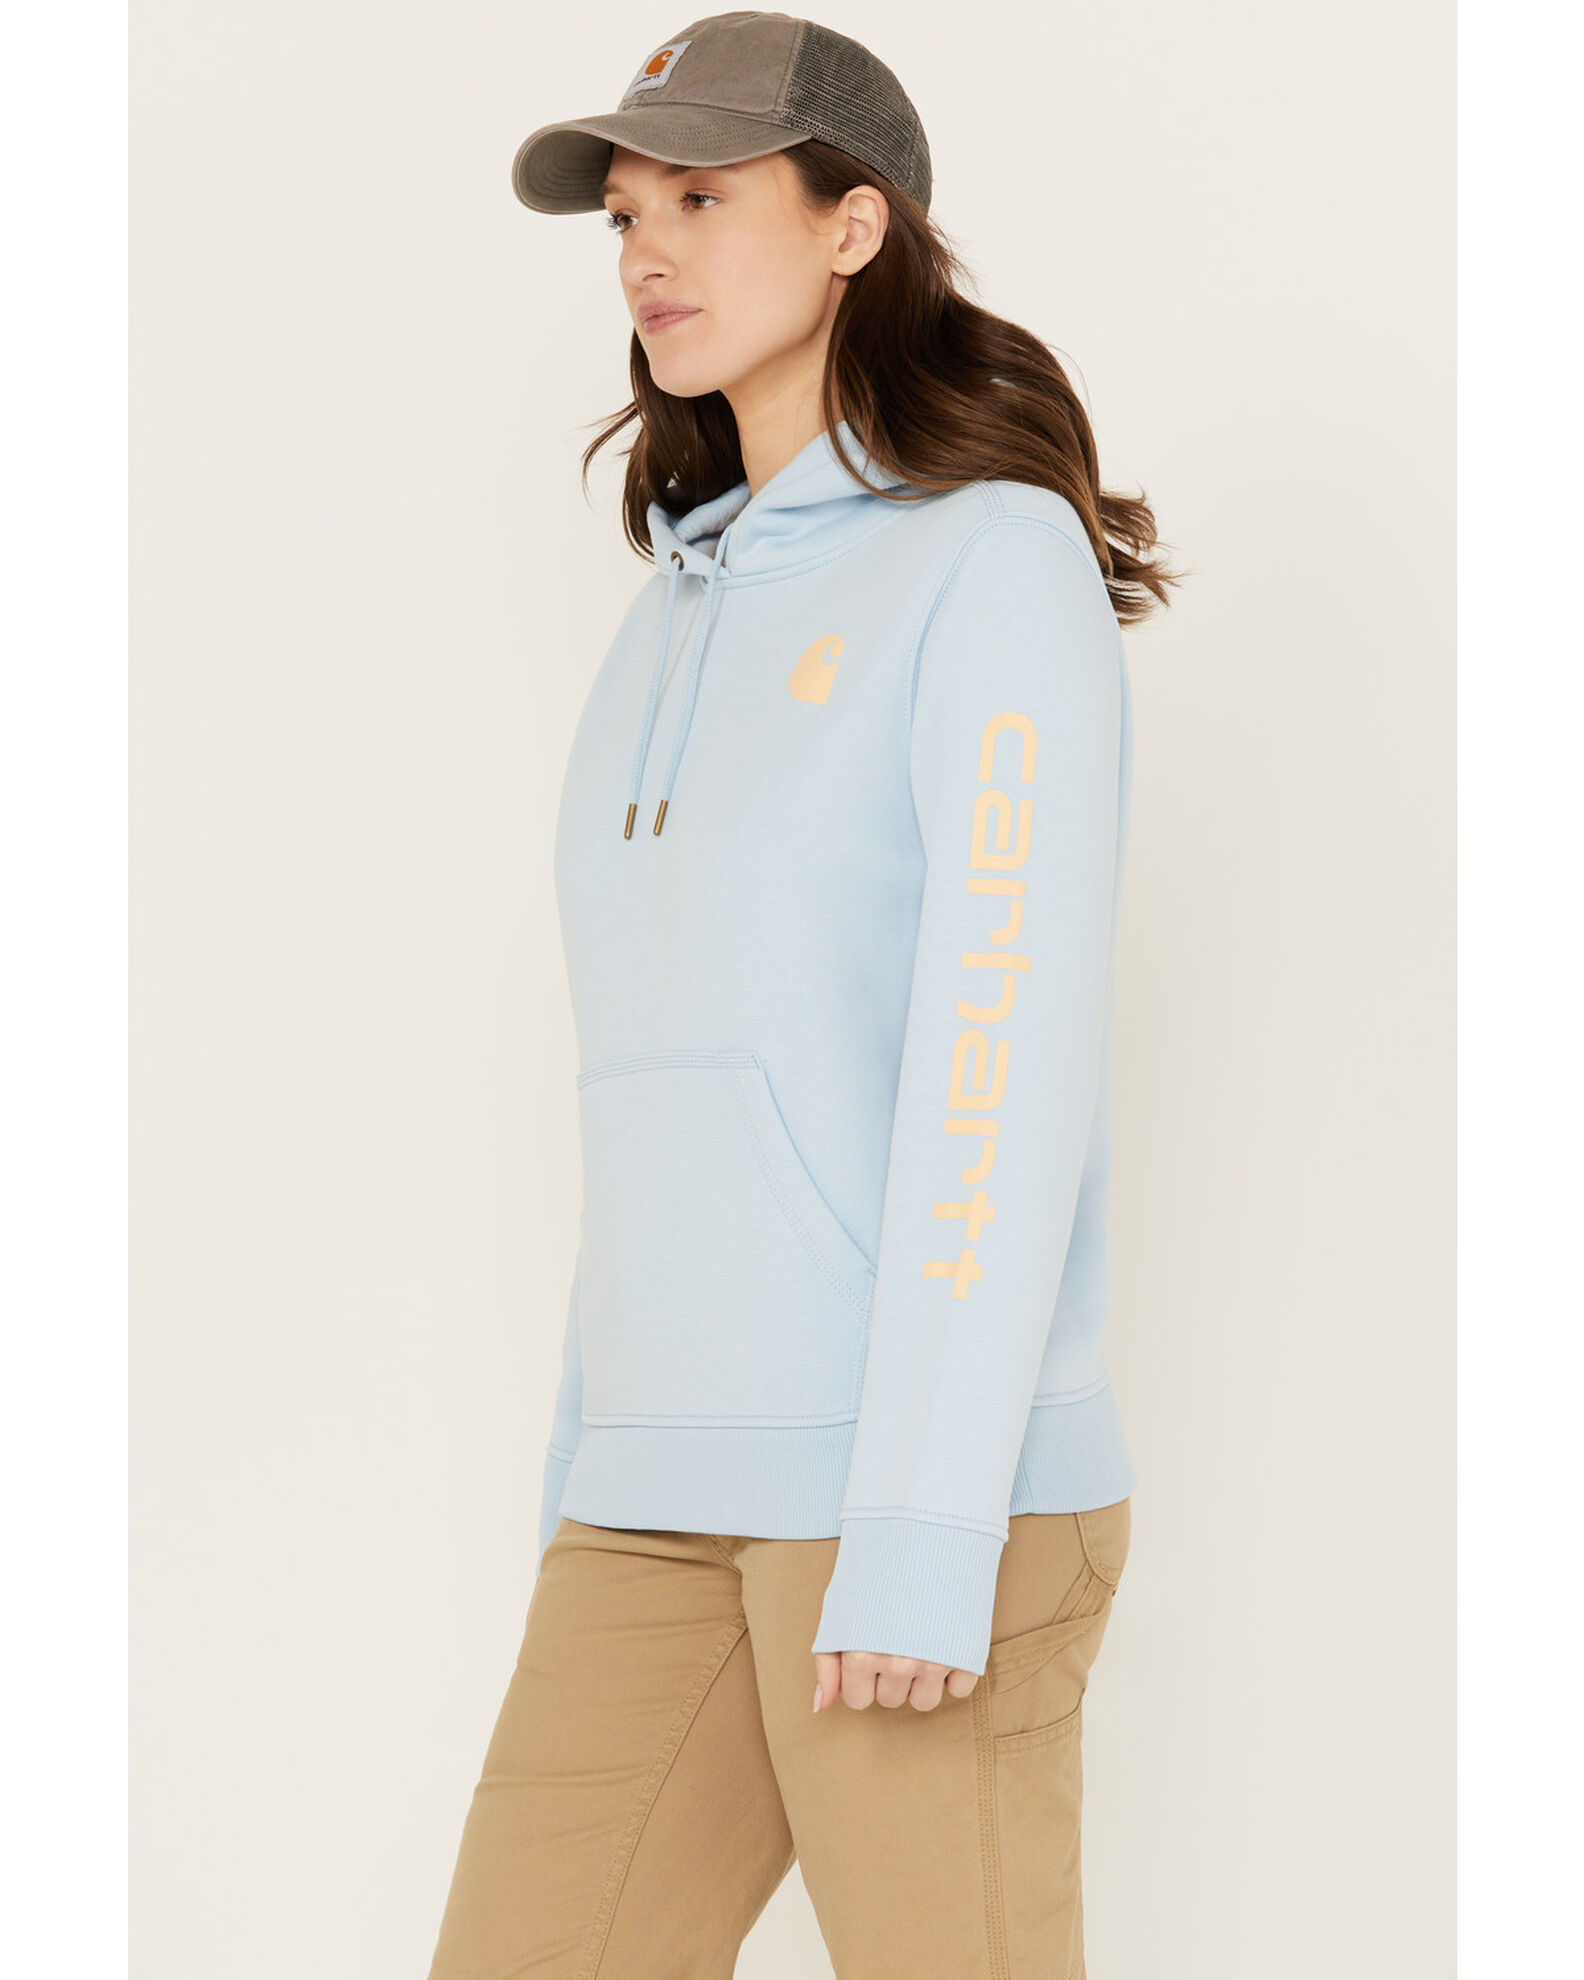 Carhartt Women's Relaxed Fit Midweight Logo Graphic Hoodie